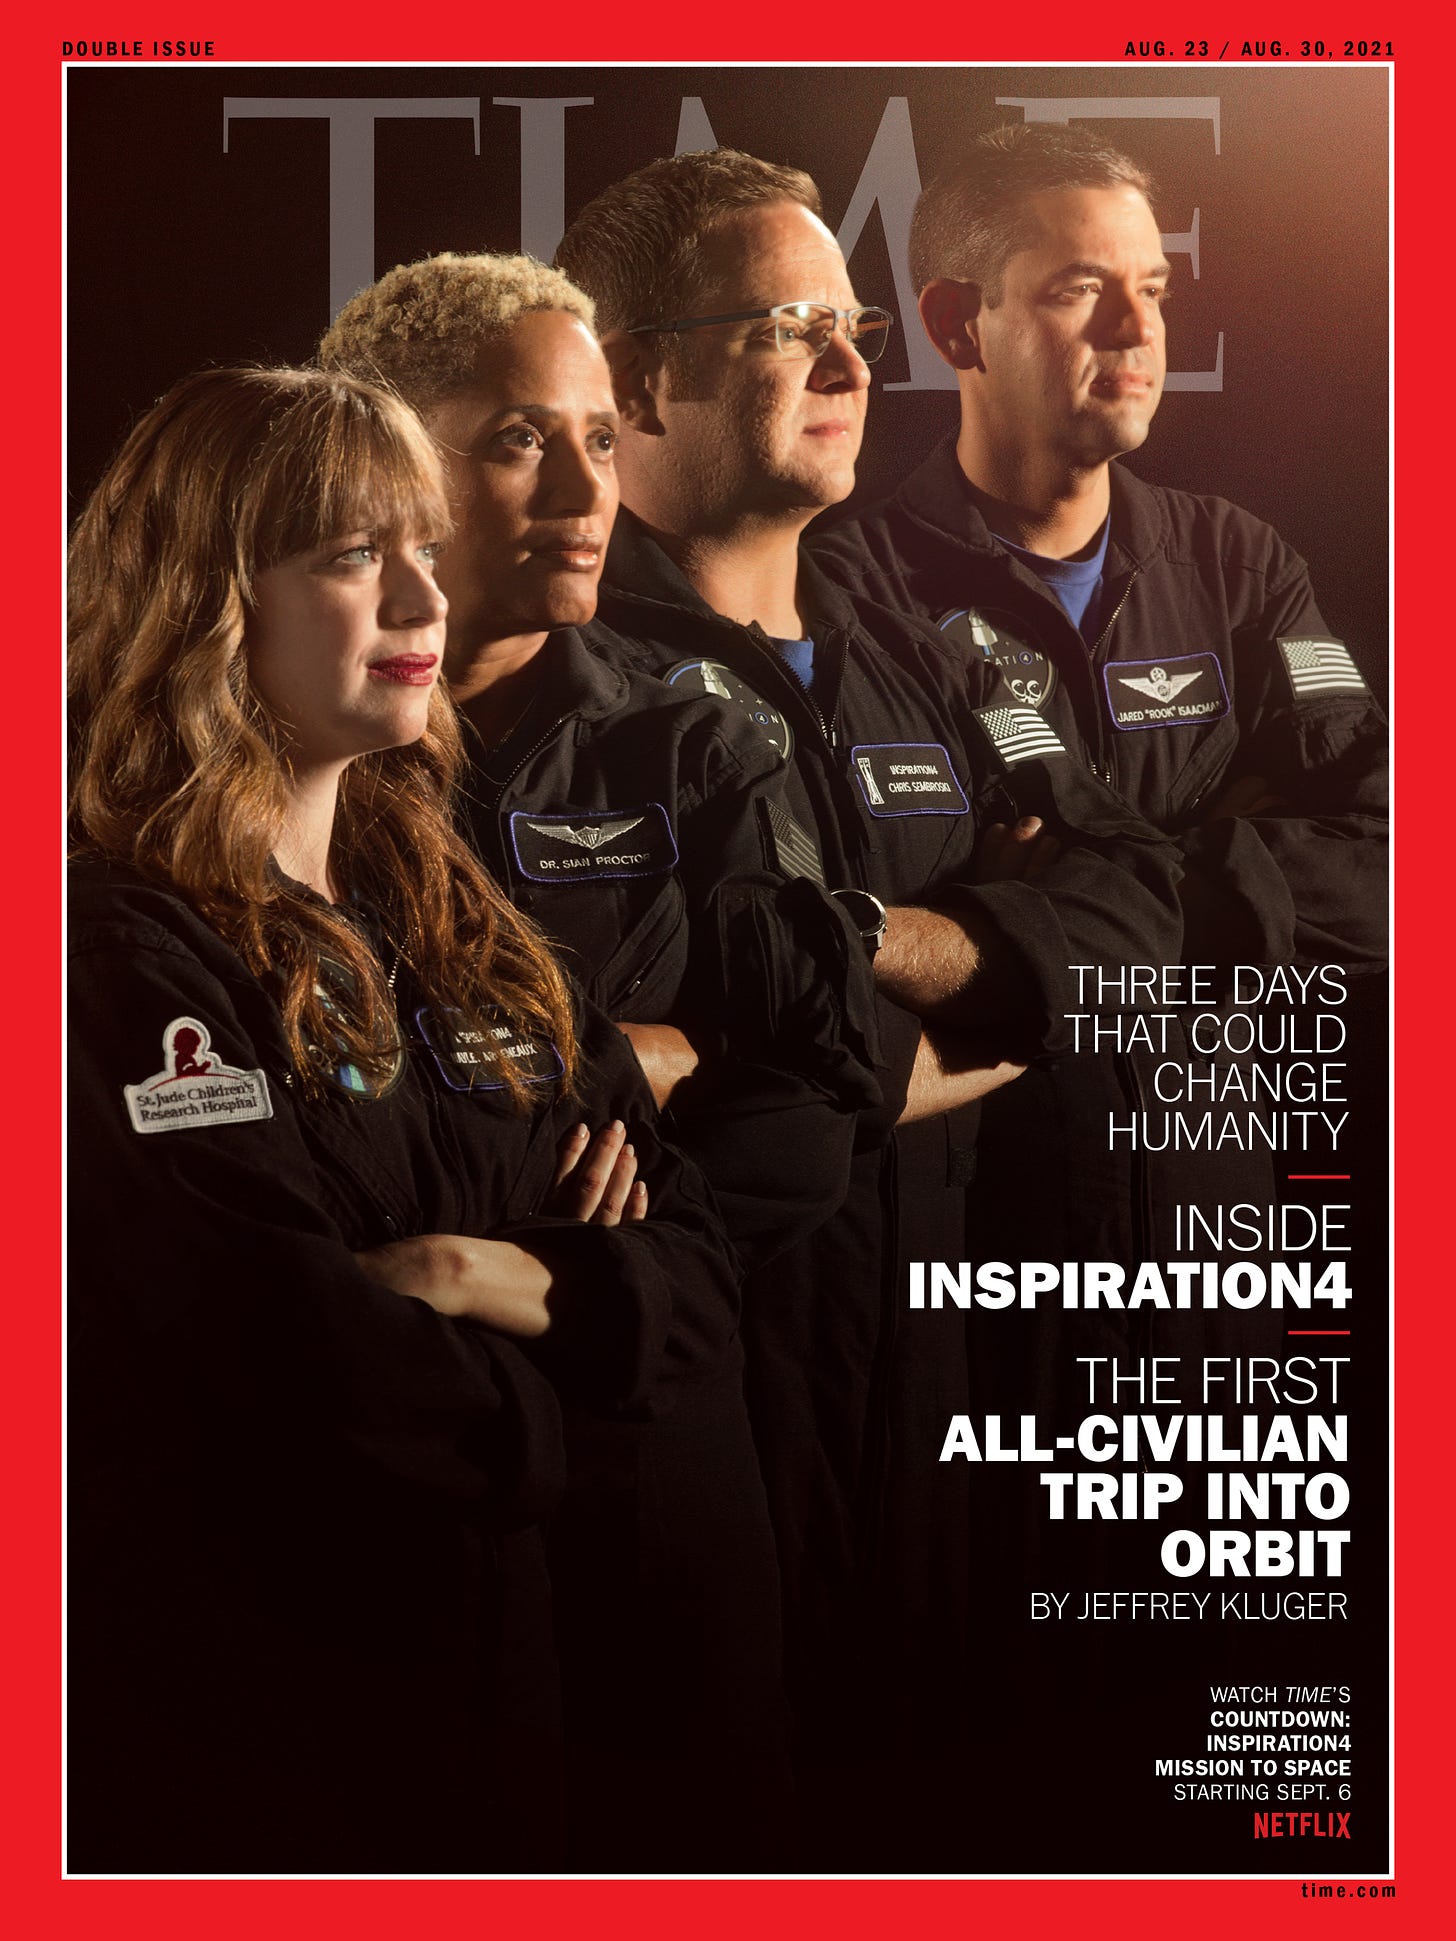 Watch Live: Inspiration4 Crew Launches to Space | TIME